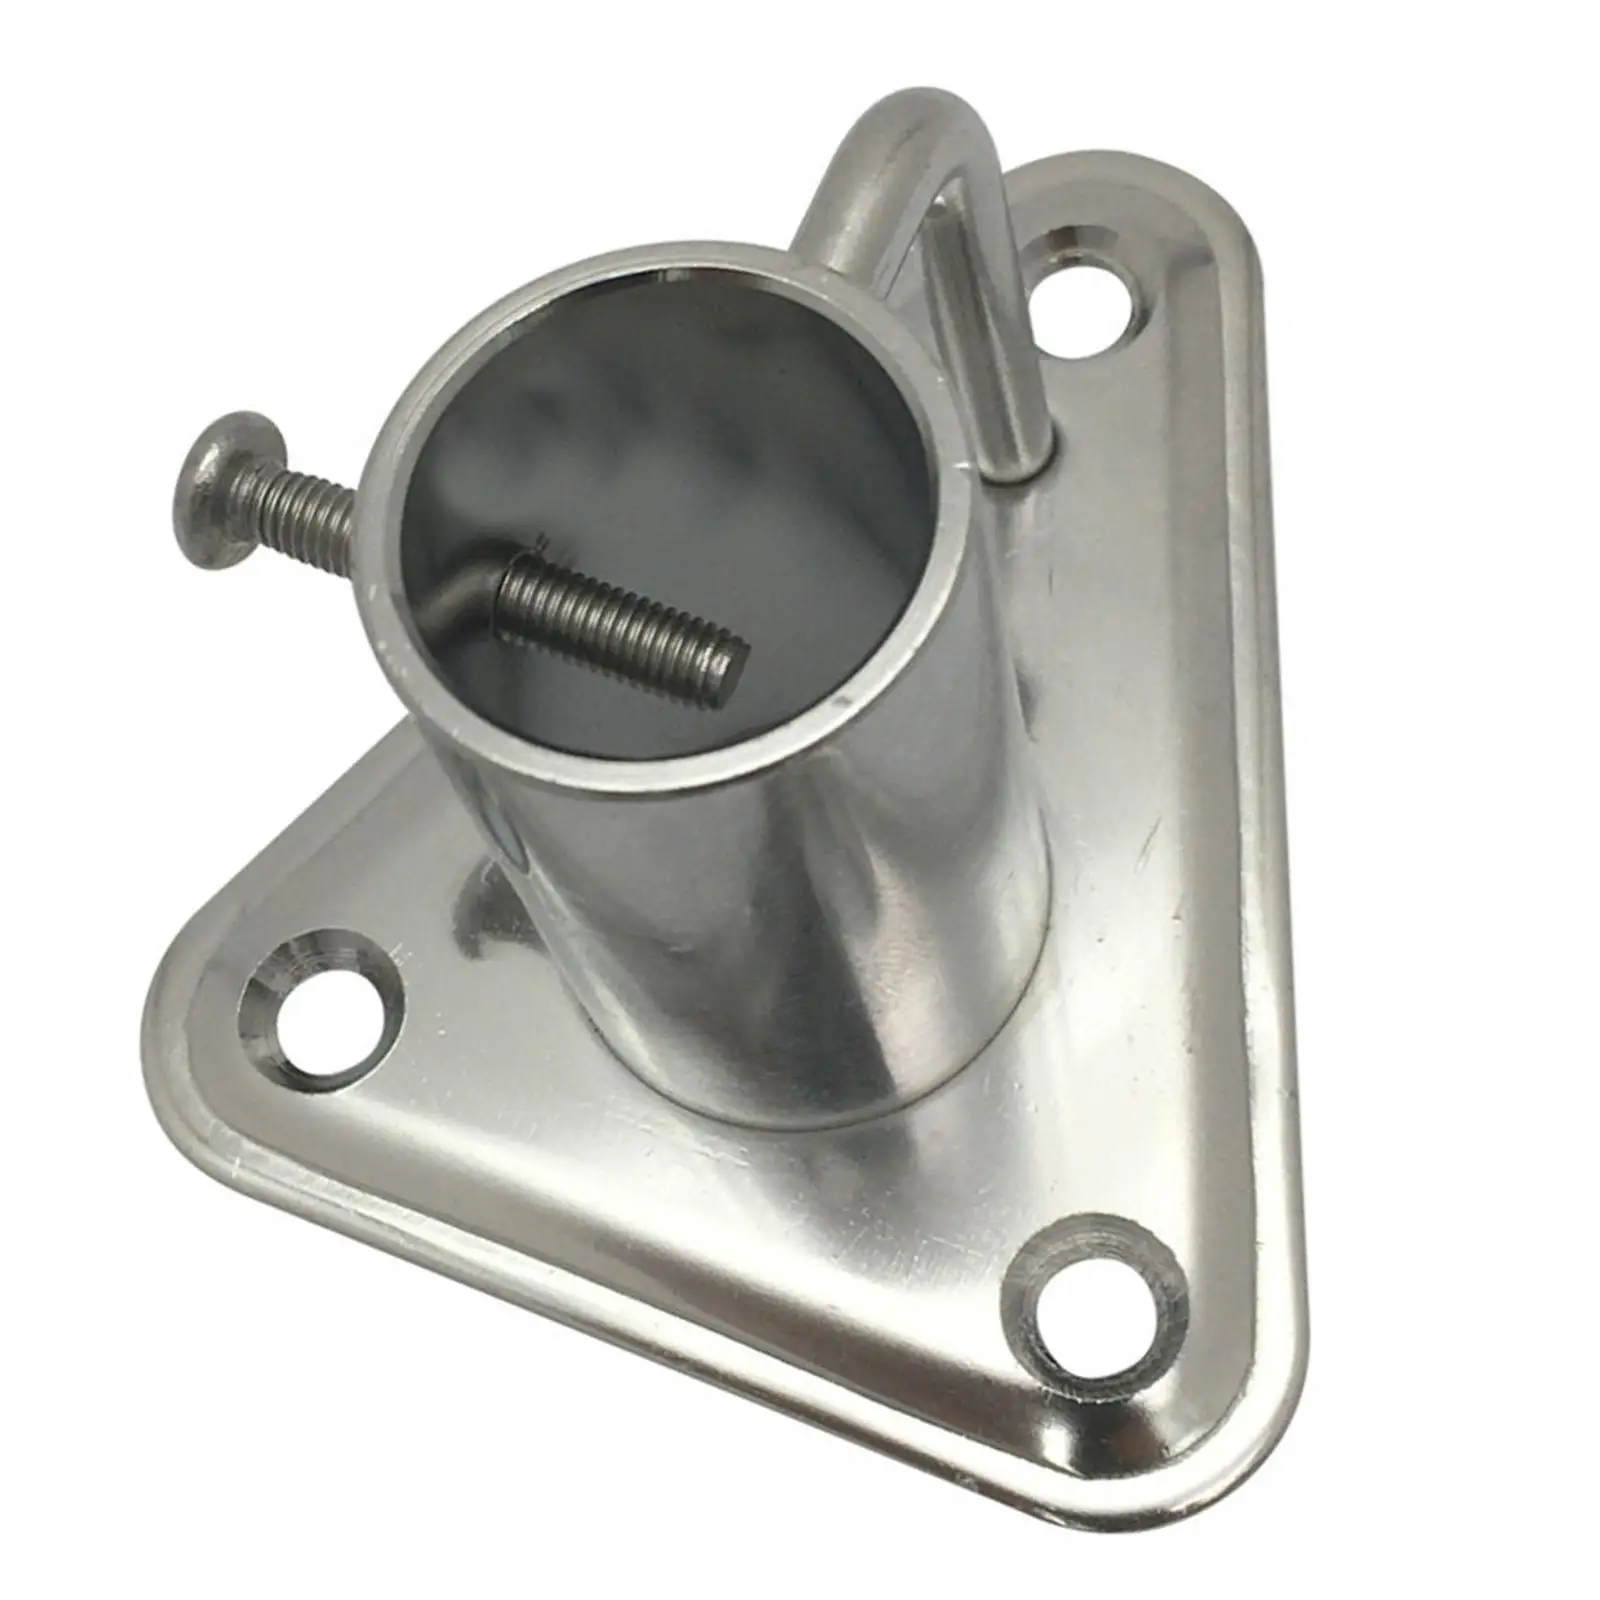 Boat Cleat Stanchion Socket 90 Anti Rust with Triangular Base and Buttress for Replace